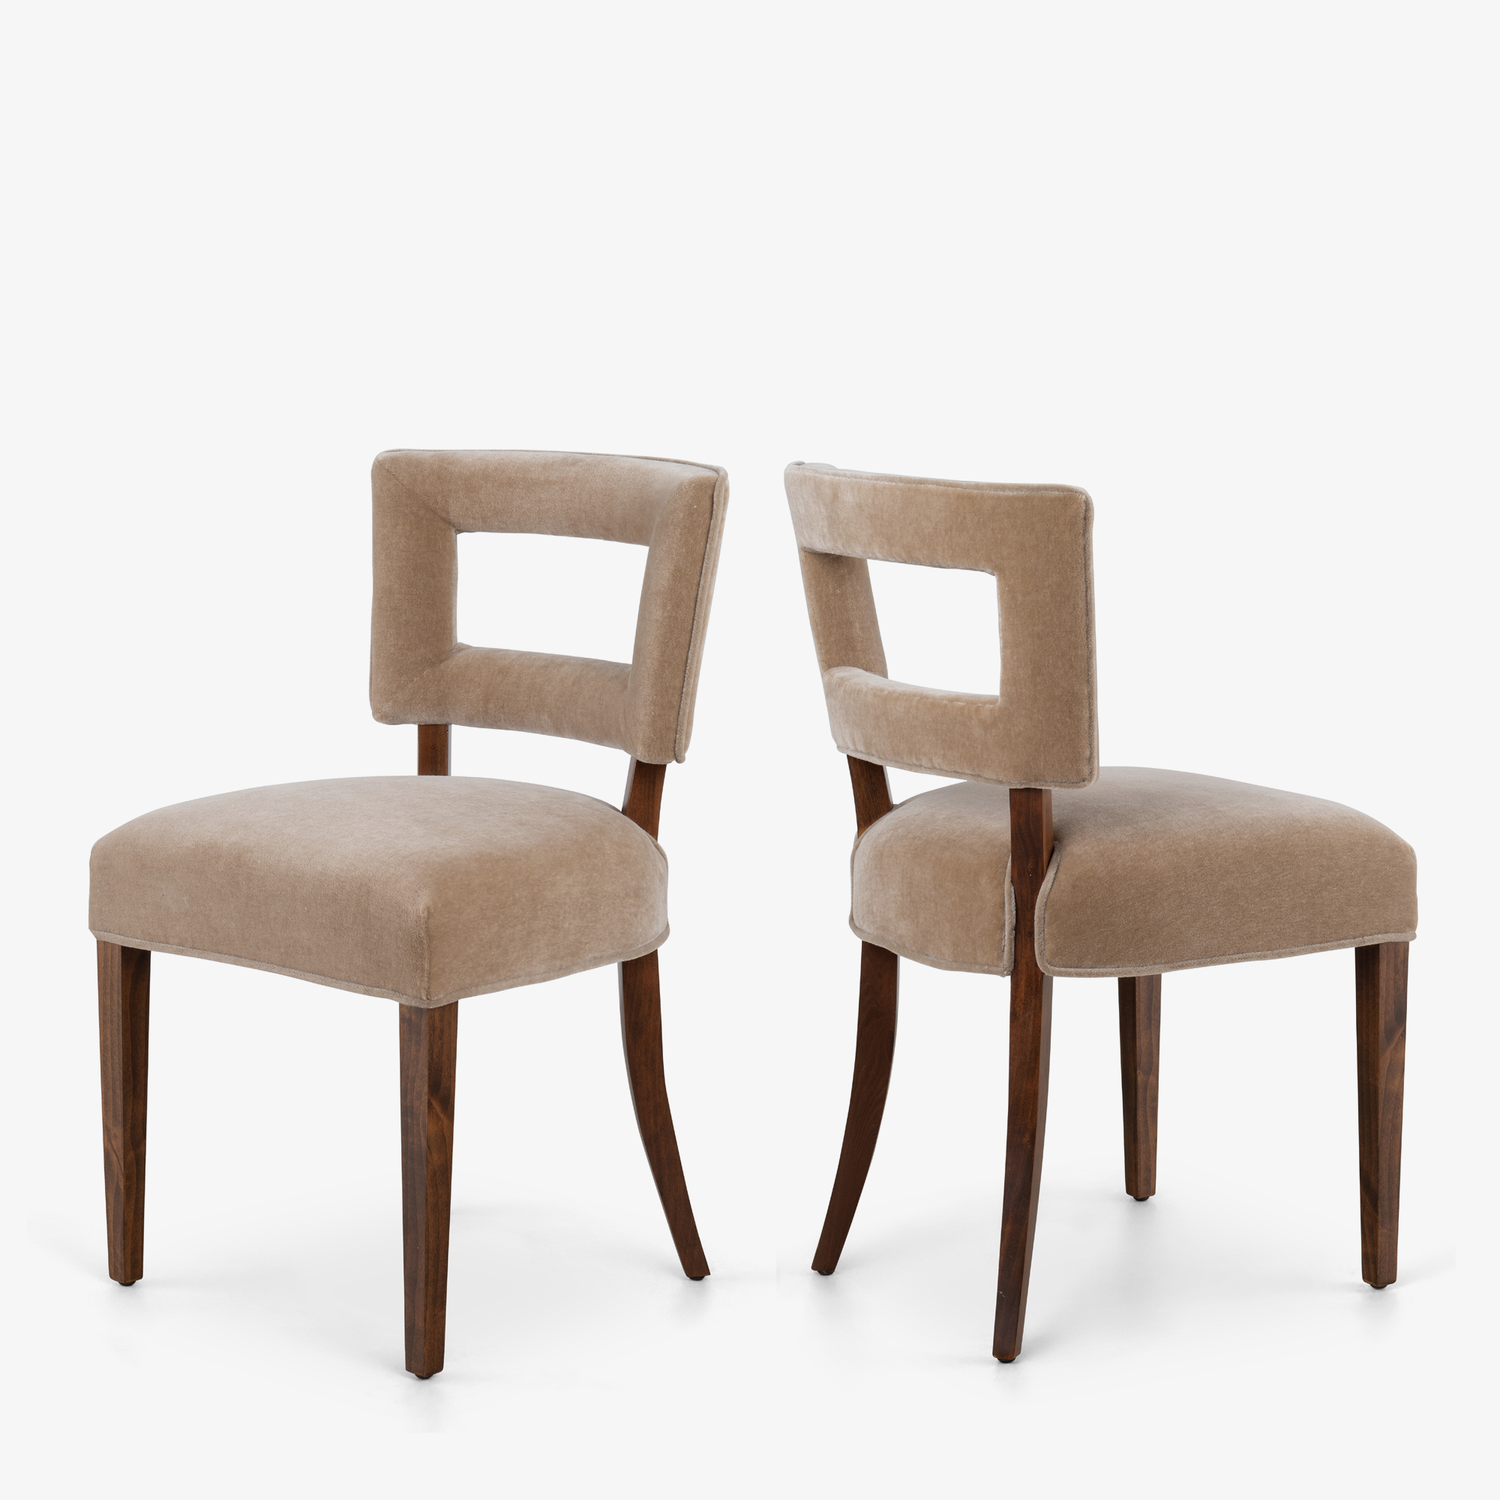 Rohde Mohair, of Refinery | in Gilbert 6 Dining Miller Beige Set Object Herman Paldao Sand Chairs for